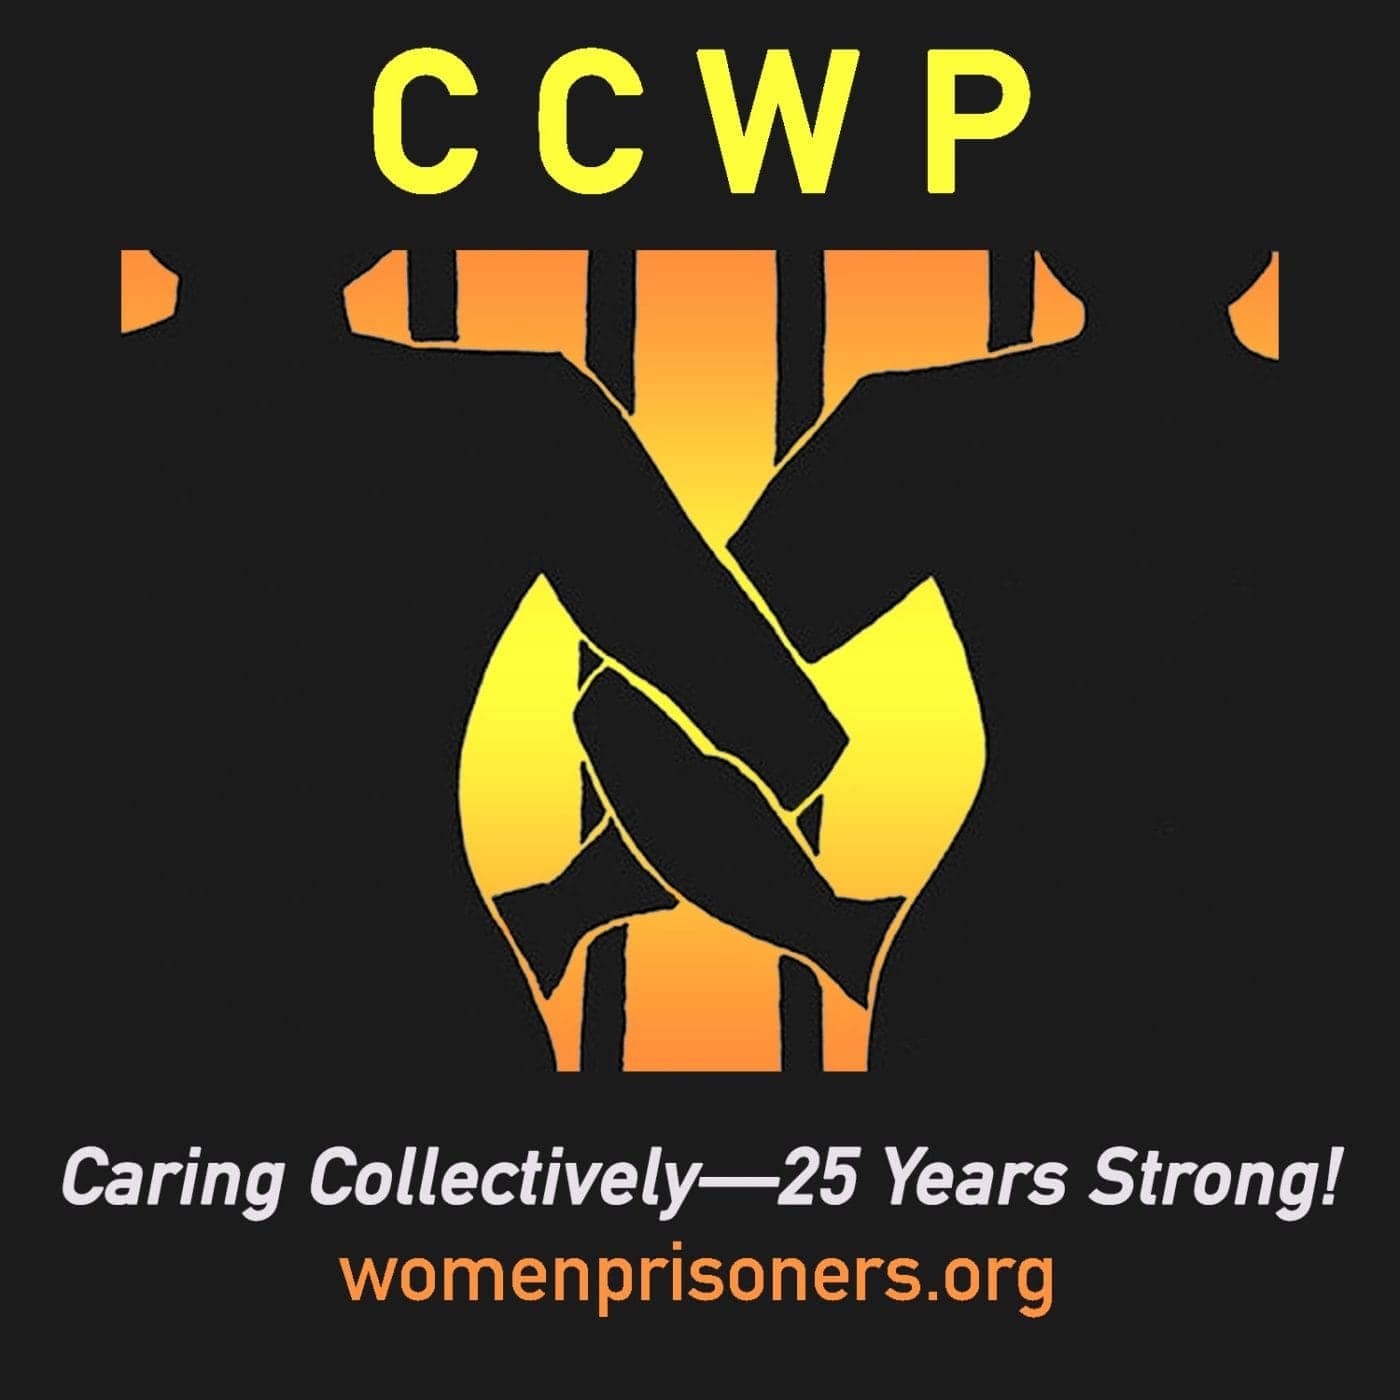 CCWP-logo-Caring-Collectively-25-Years-Strong-womenprisoners.org-2021-1400x1400, California Coalition for Women Prisoners’ statement on SB 132 implementation, Abolition Now! 